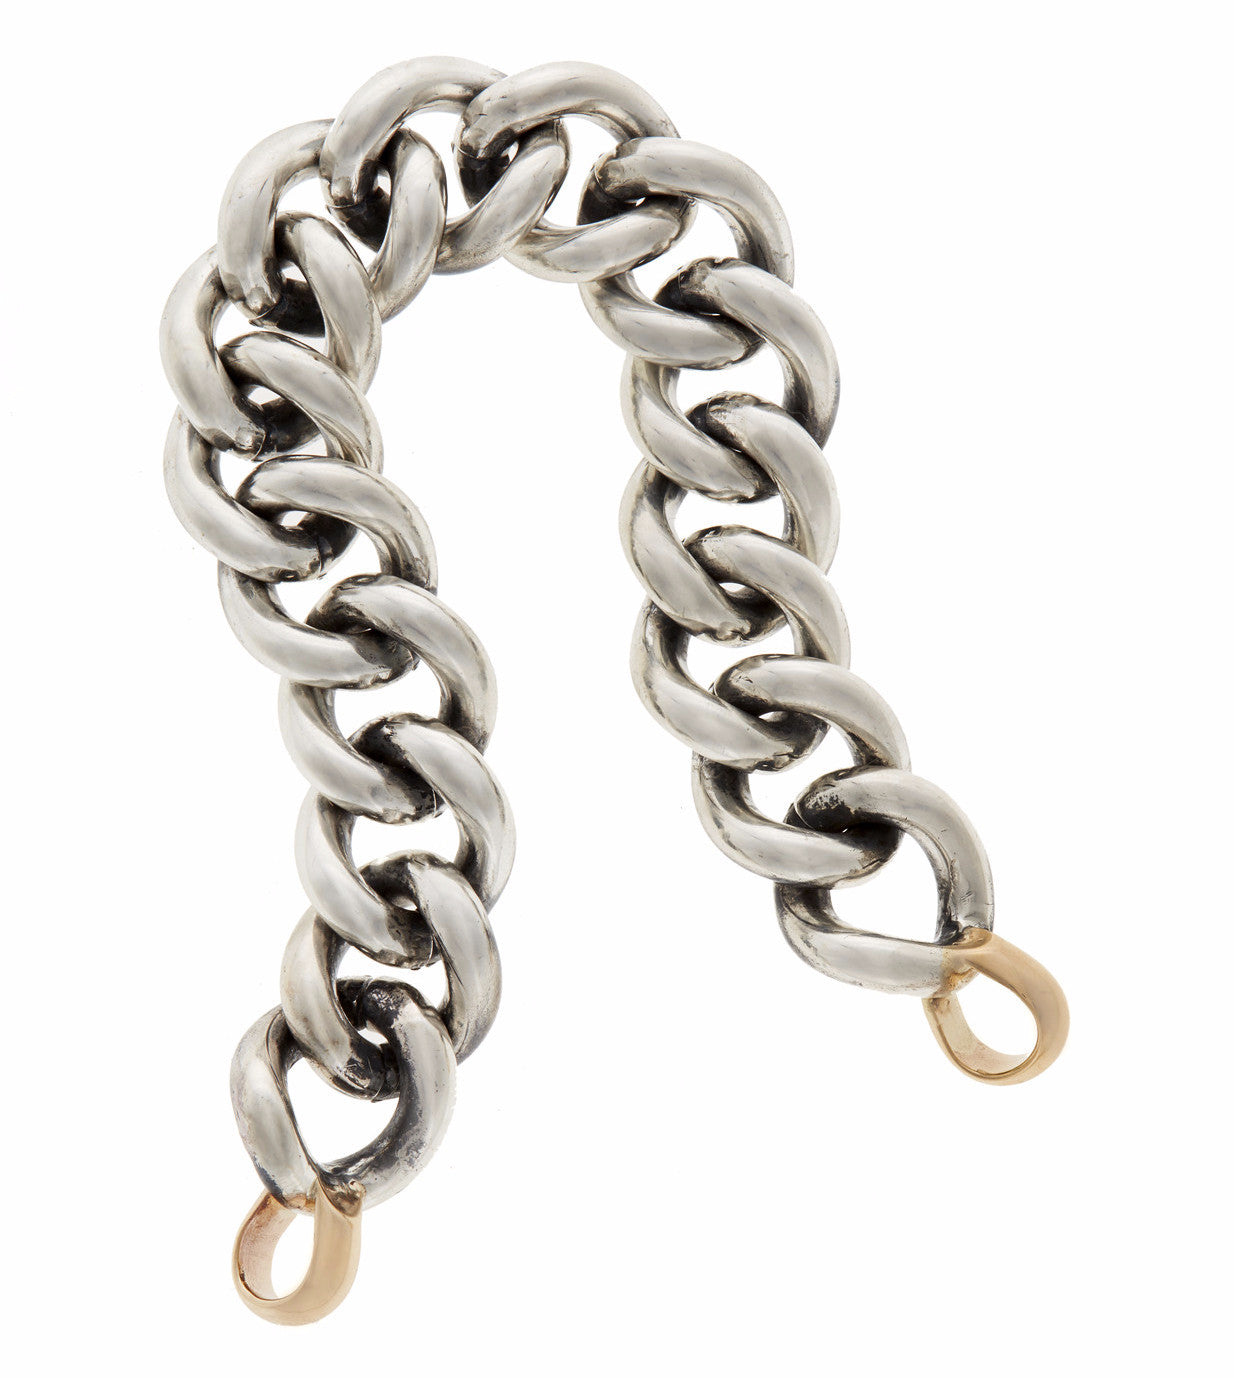 Chunky silver curb chain necklace with gold ends